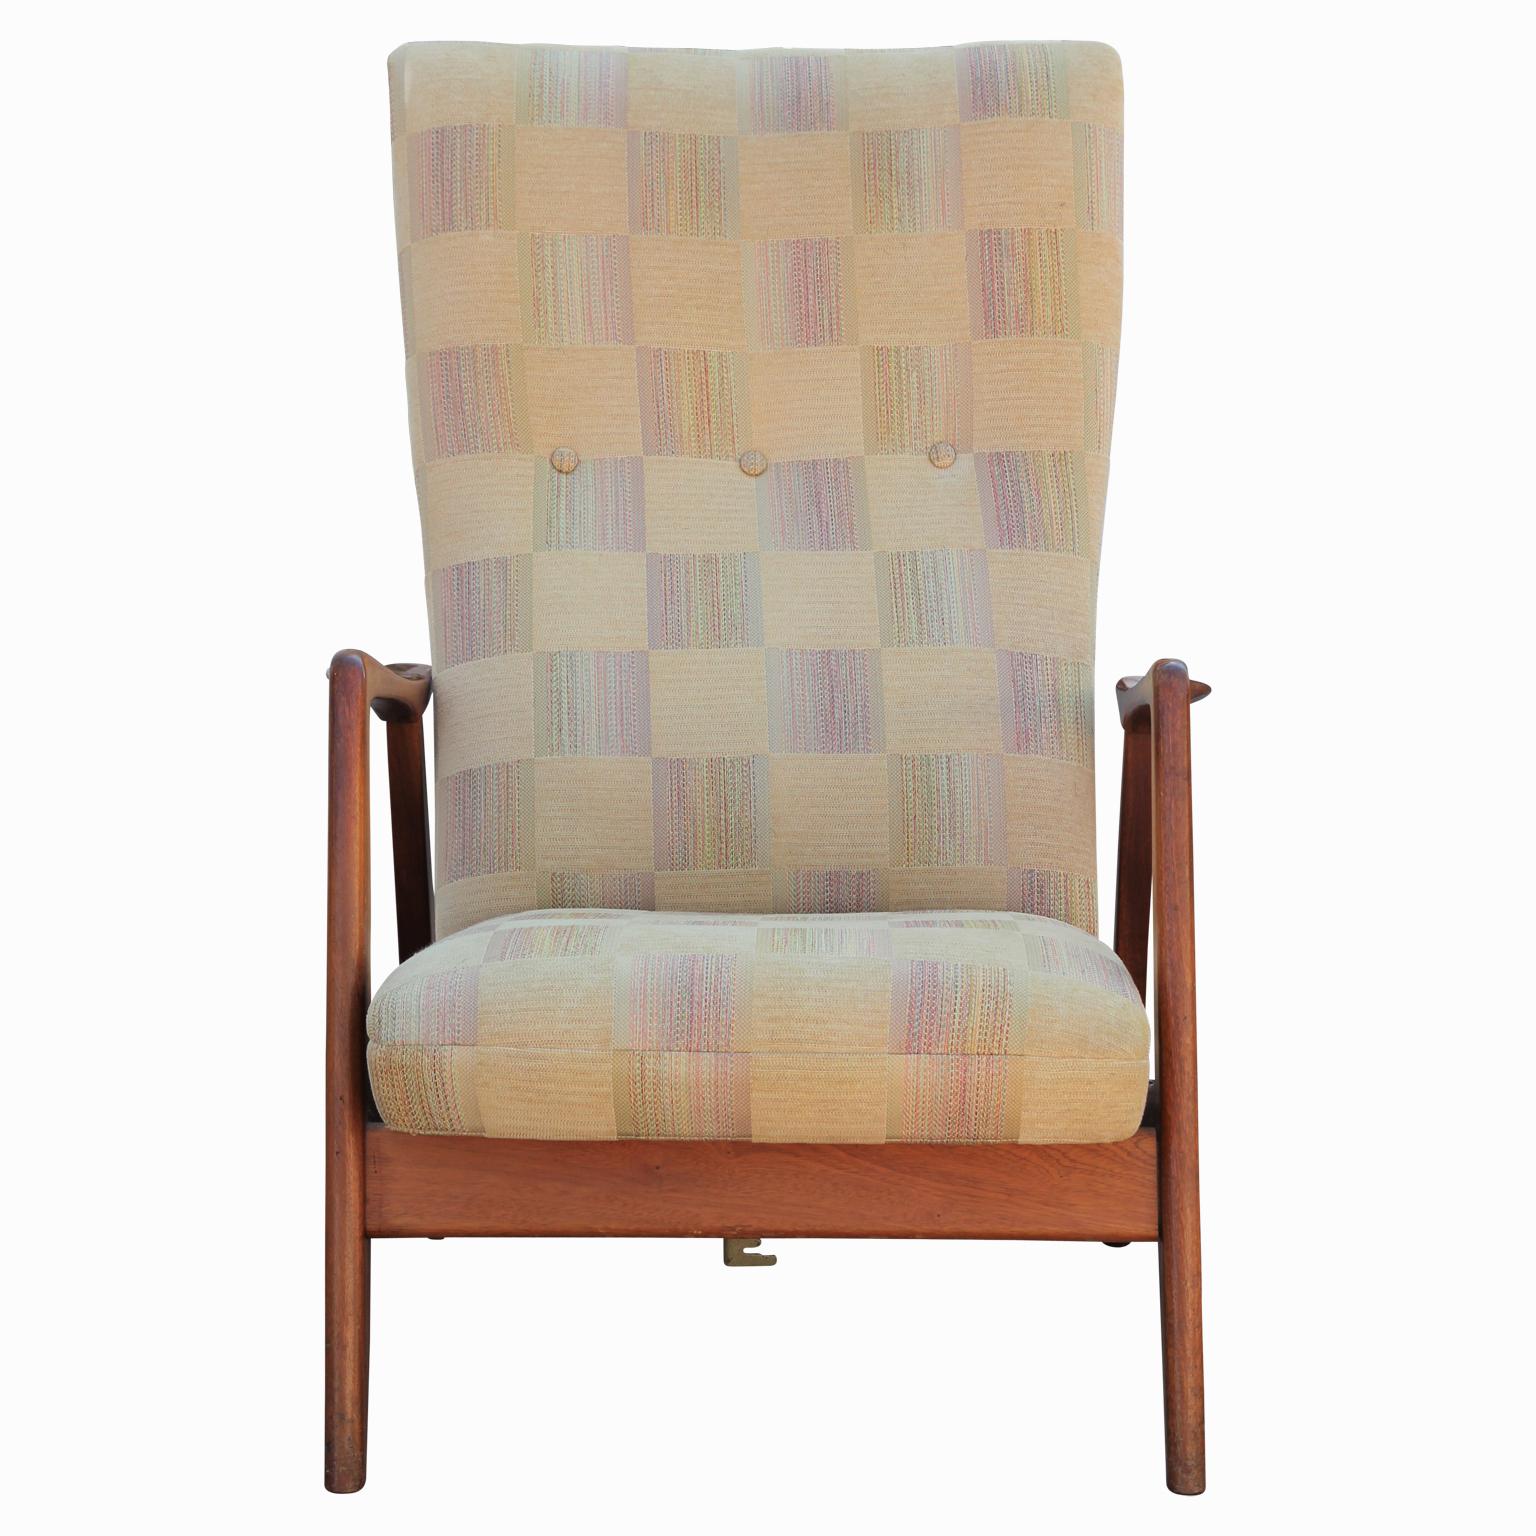 Pair of cream checkered and wood reclining lounge chairs designed by Arnestad Bruk. The 'Rock Siesta Chair' is a beautiful example of functional Mid-Century Modern furniture. The chair is stamped on the wood base by the manufacturer 